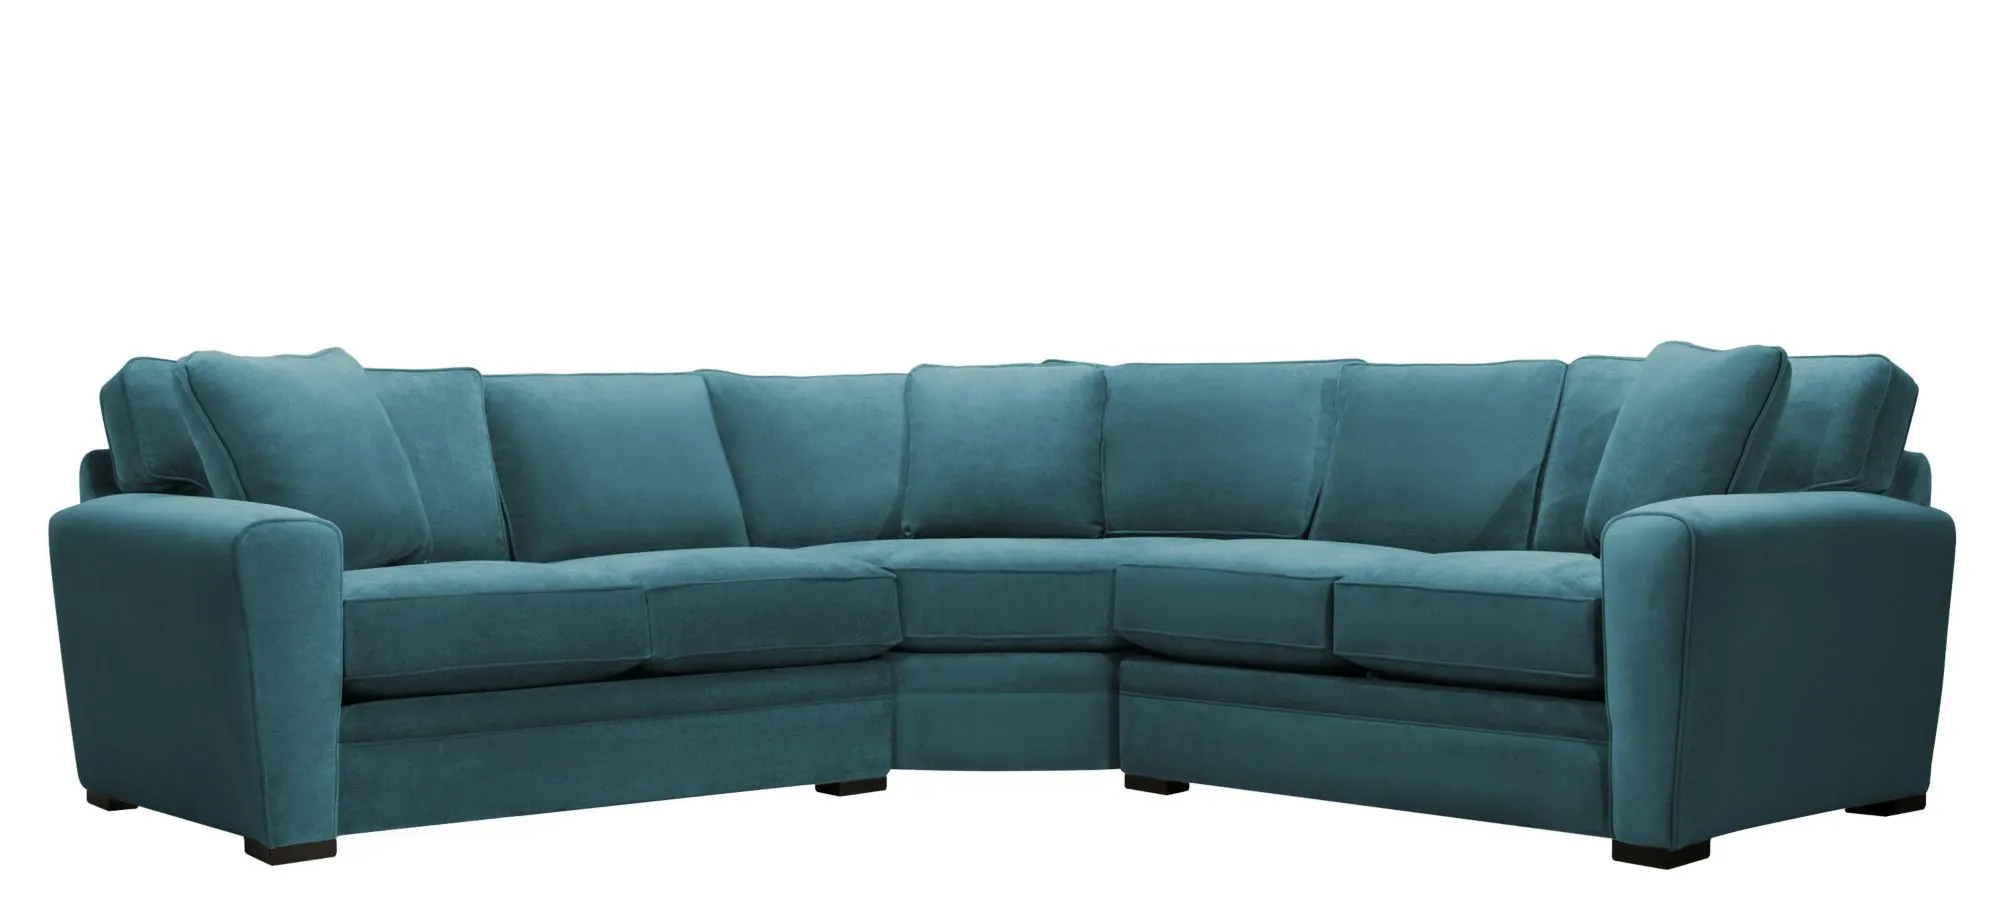 Artemis II 3-pc. Symmetrical Sectional Sofa in Gypsy Teal by Jonathan Louis